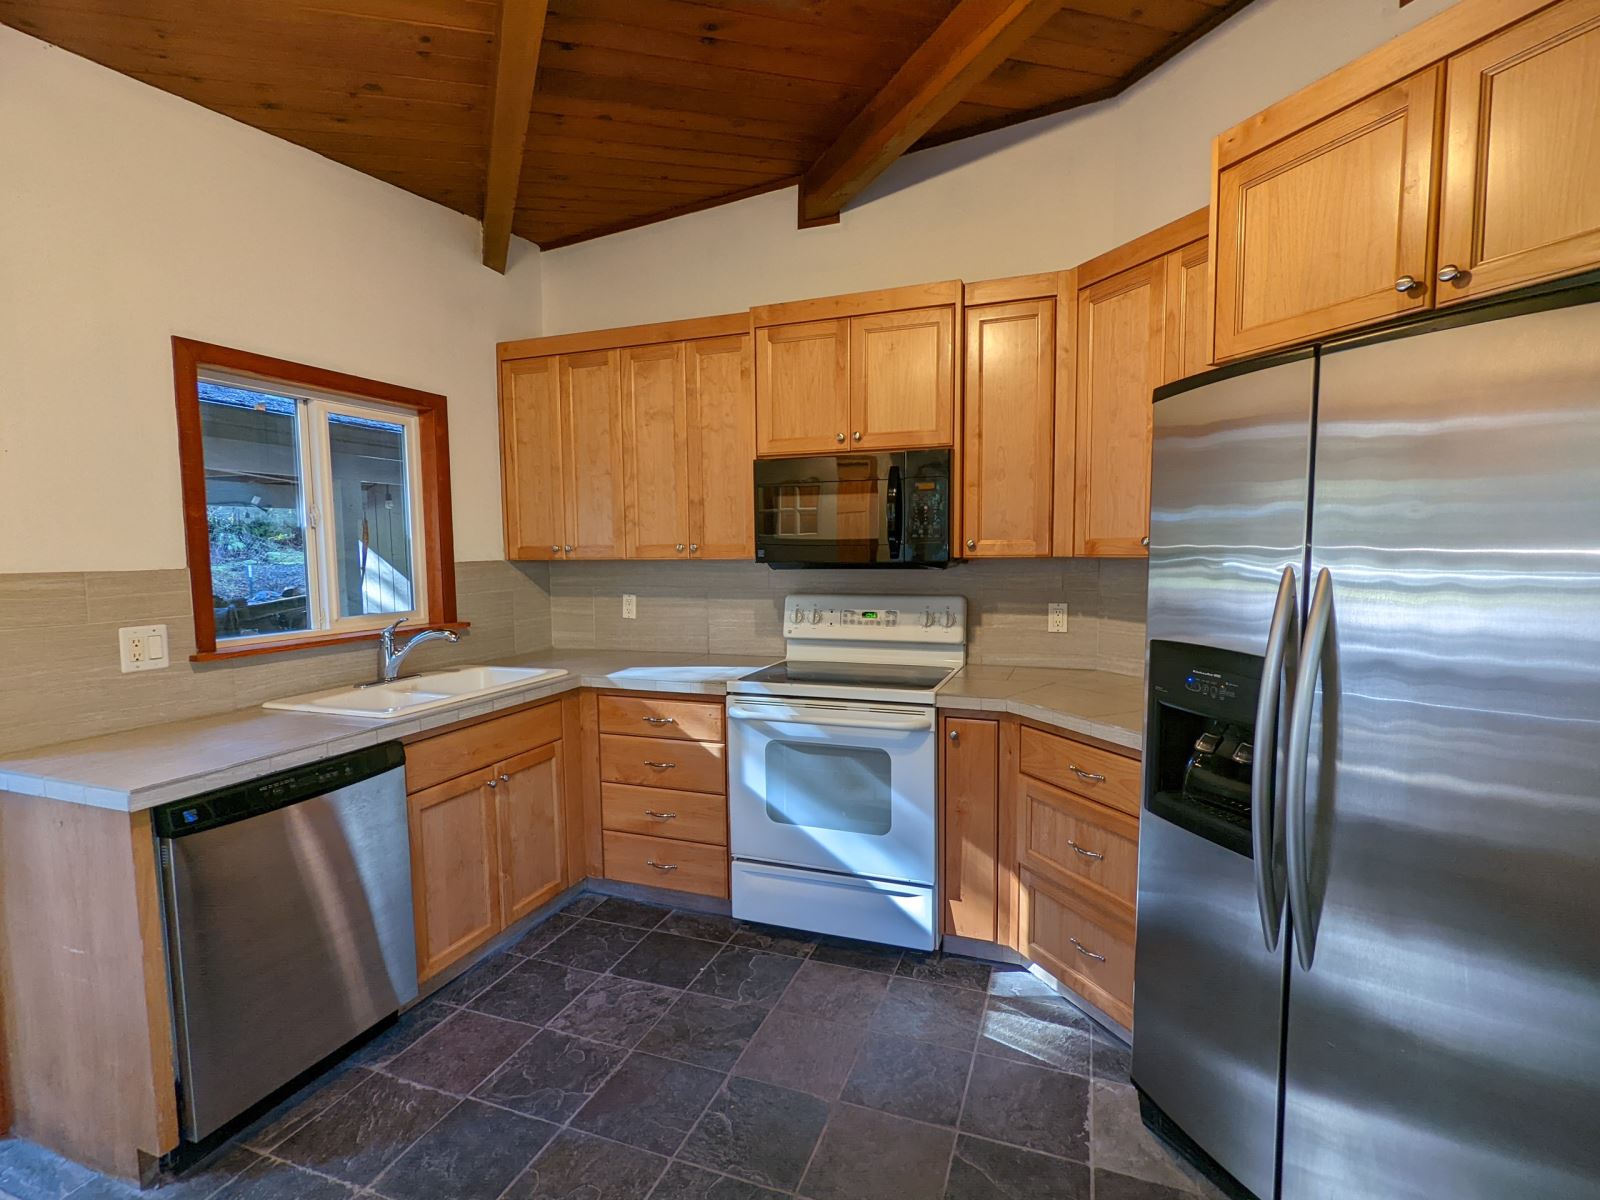 Kitchen of three bedroom ranch in Brightwood Oregon